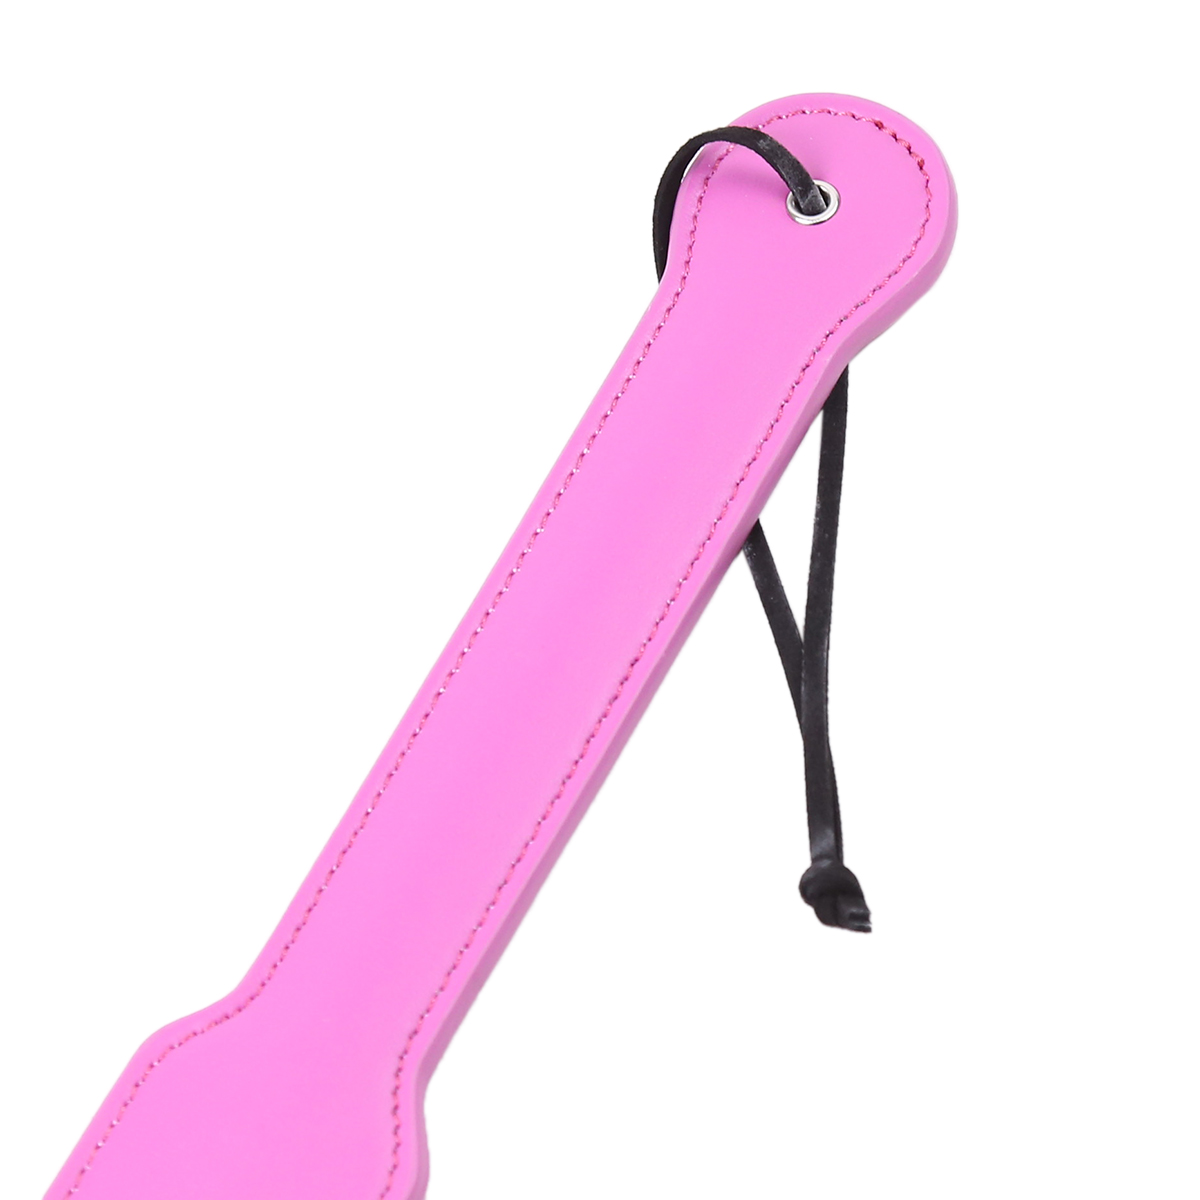 Classic-Paddle-Pink-OPR-321037-3